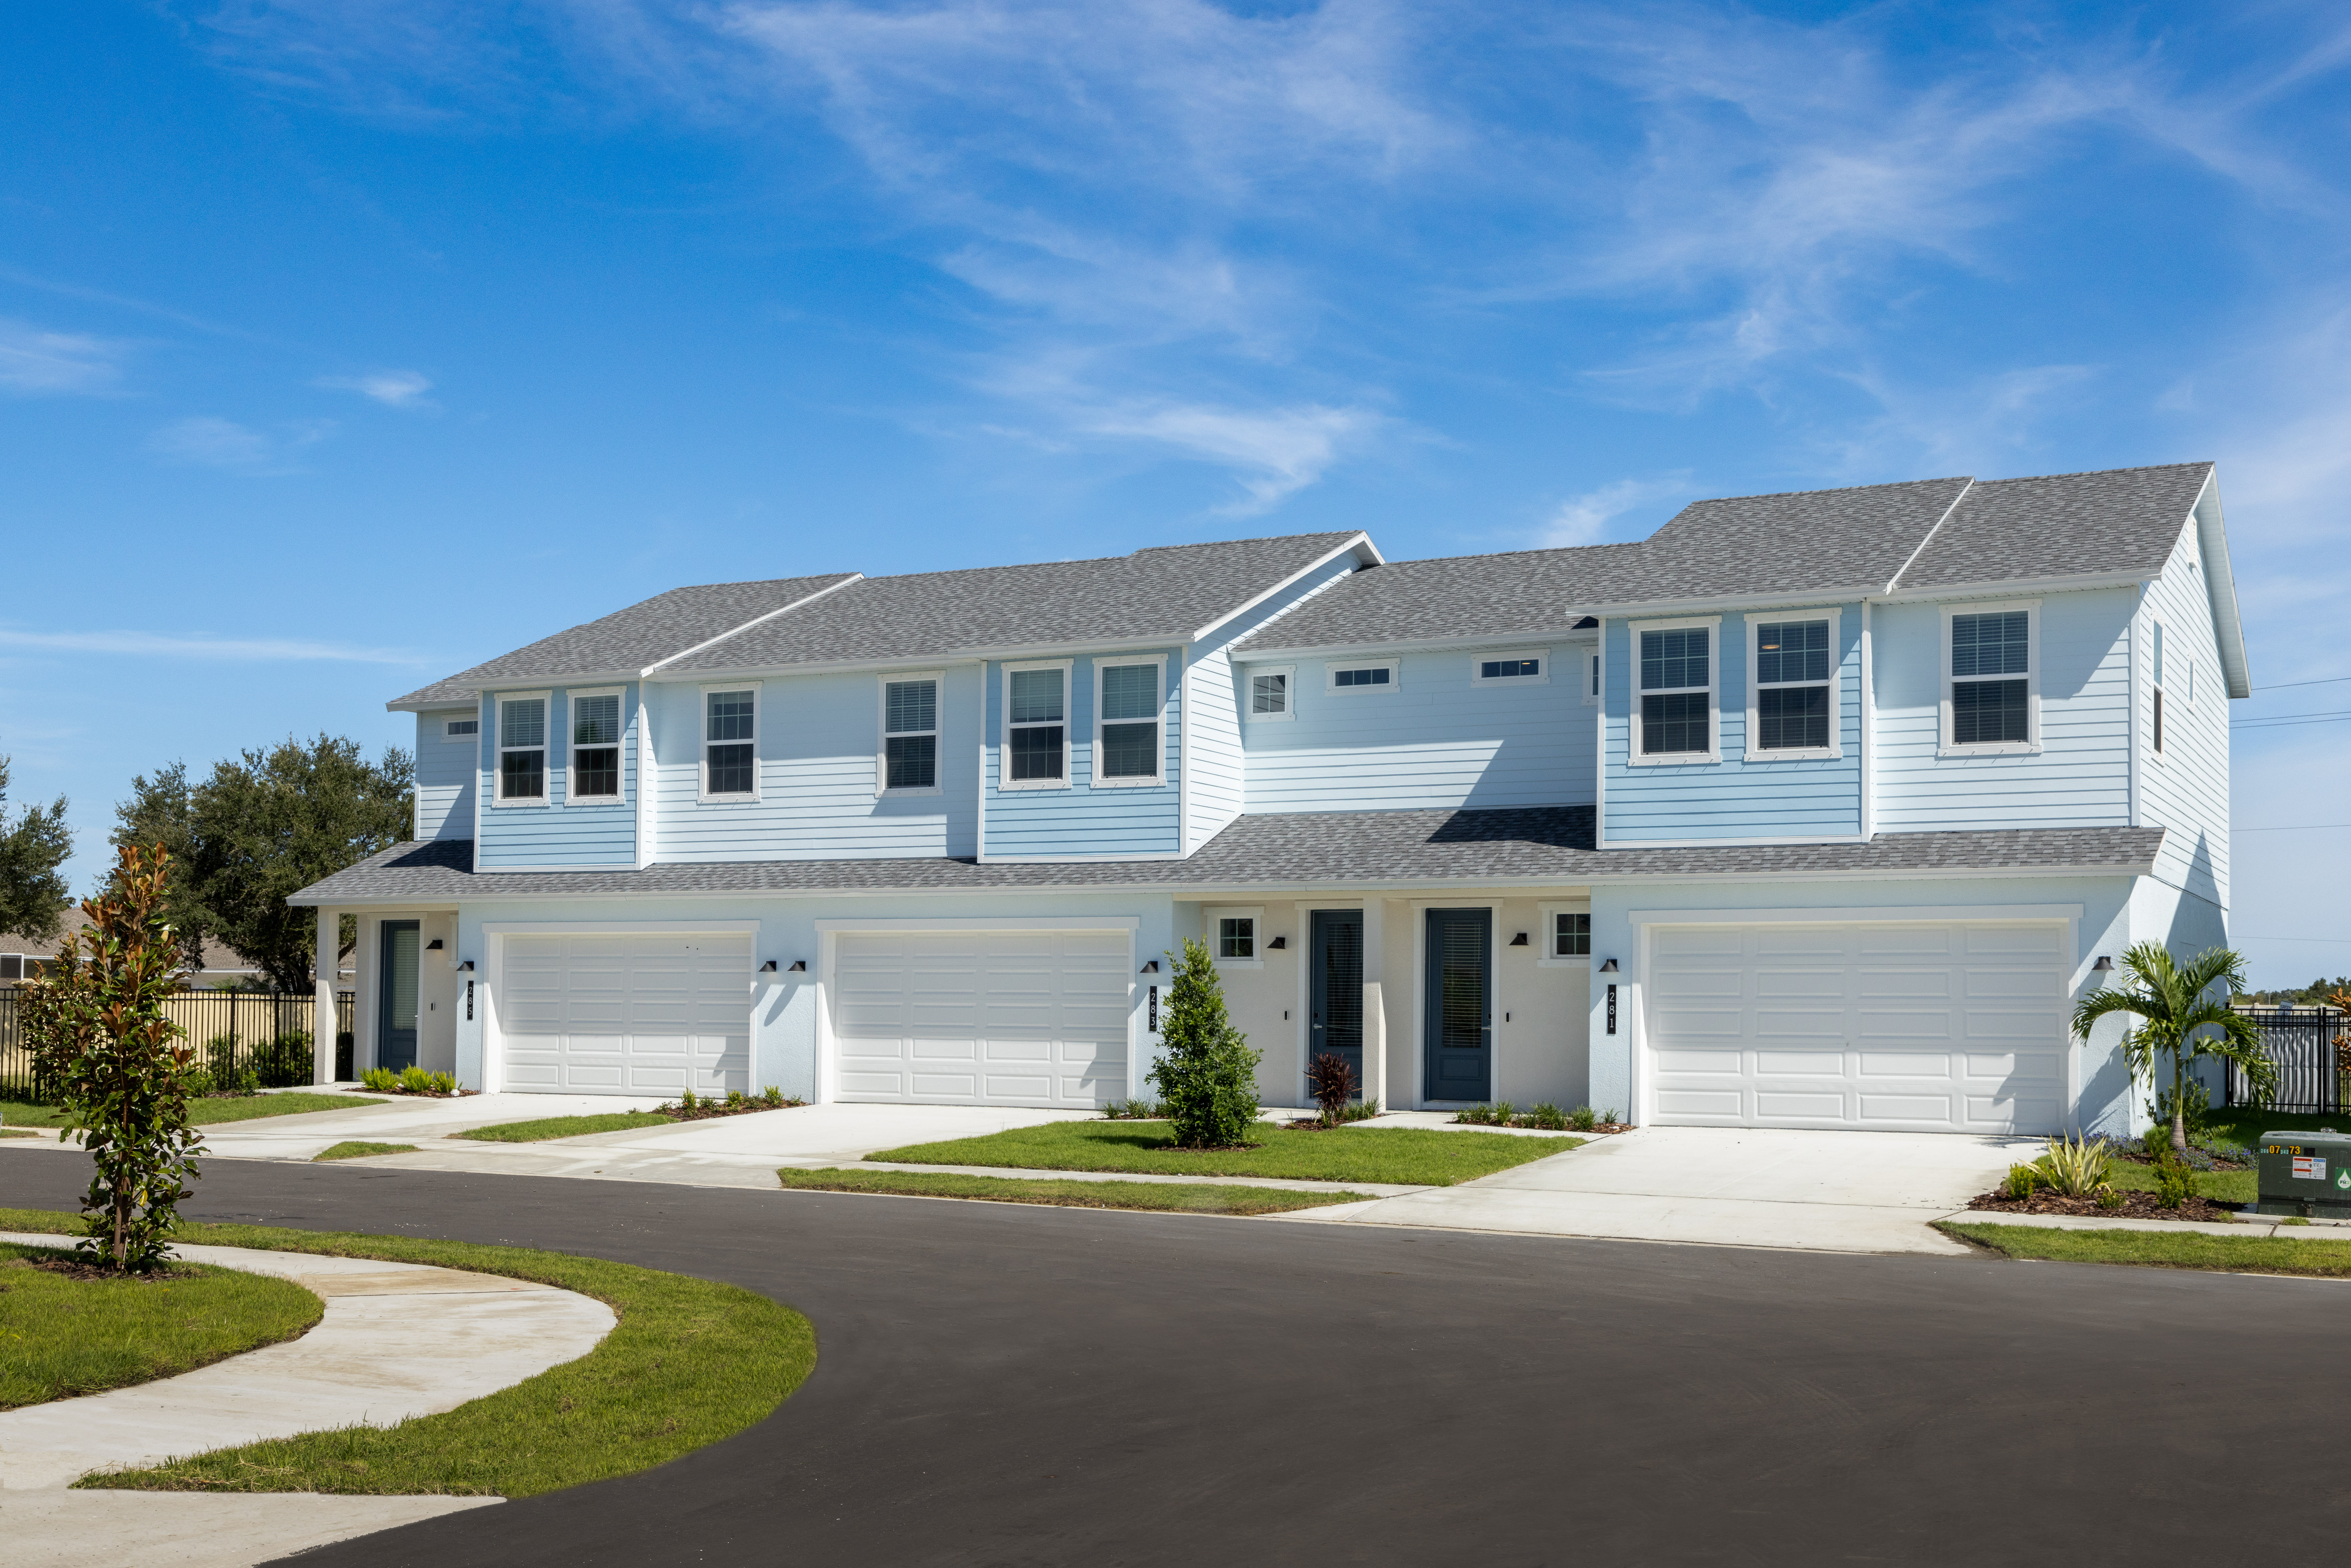 Now Open: Cyrene at Mirabay Offer Premier Build-for-rent Community n Apollo Beach